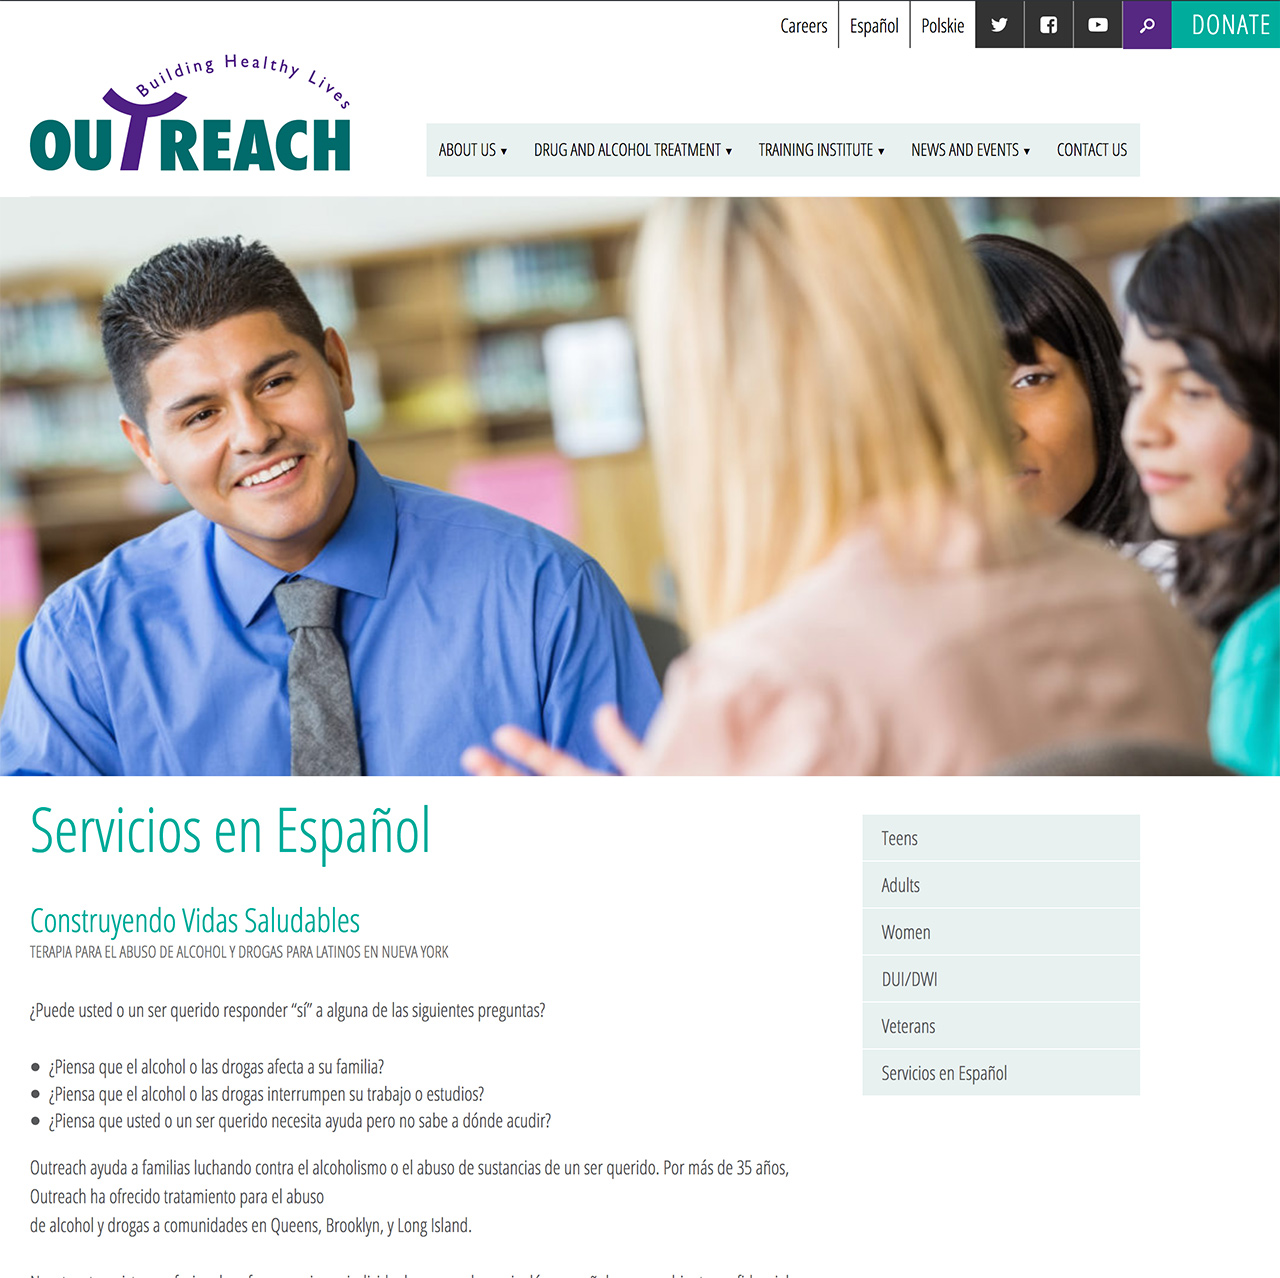 Outreach Development Corporation: Outreach Services and Editable Sidebar Quick Links